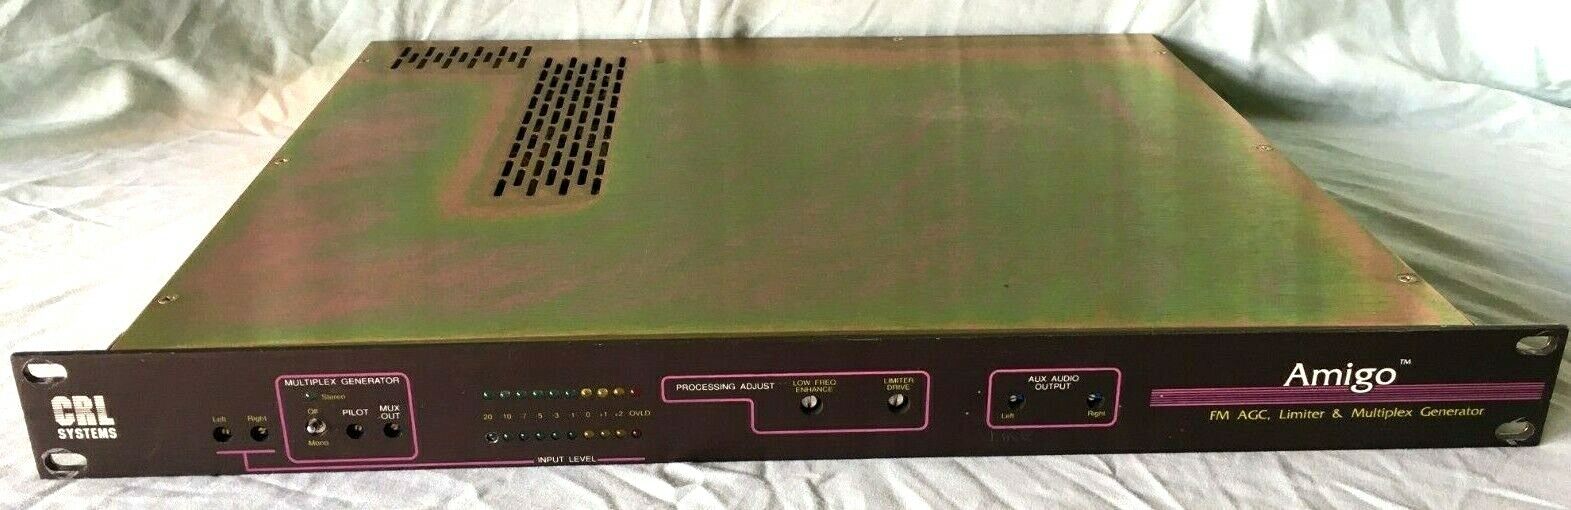 fm stereo generator for sale